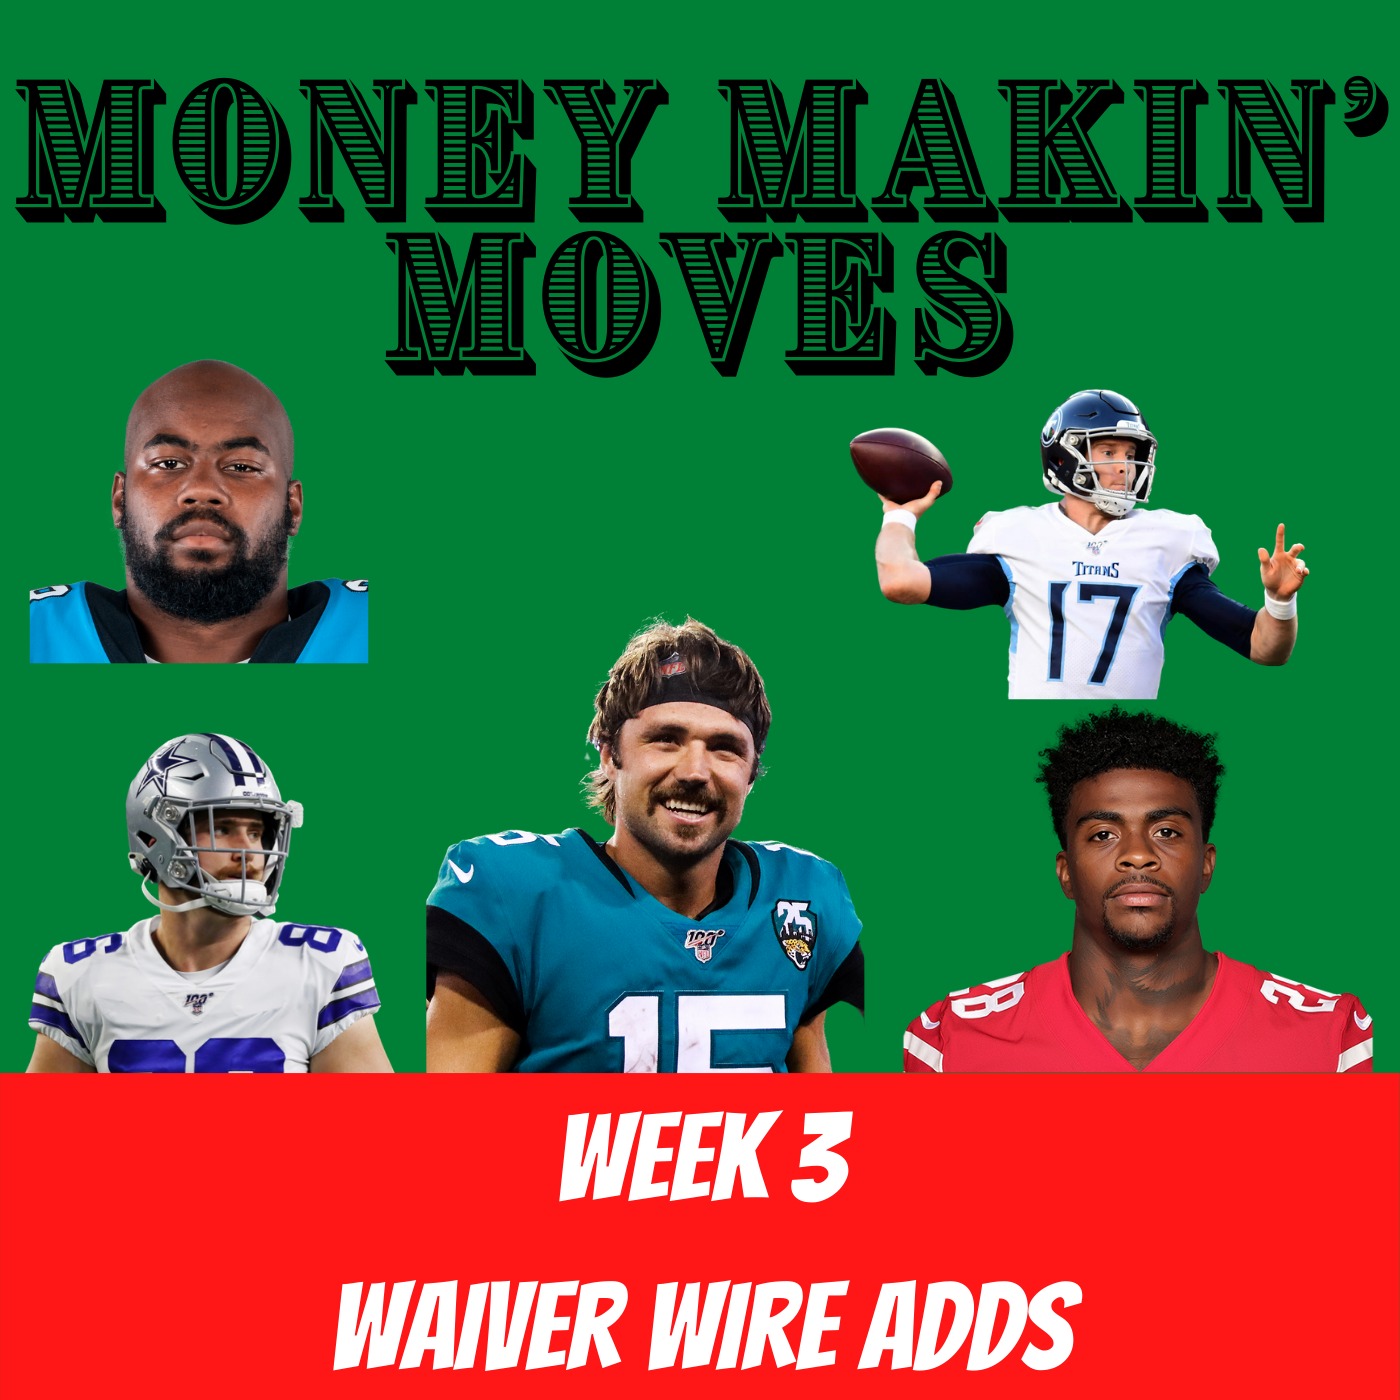 Week 3 Offensive Waiver Wire Adds | Money Makin' Moves